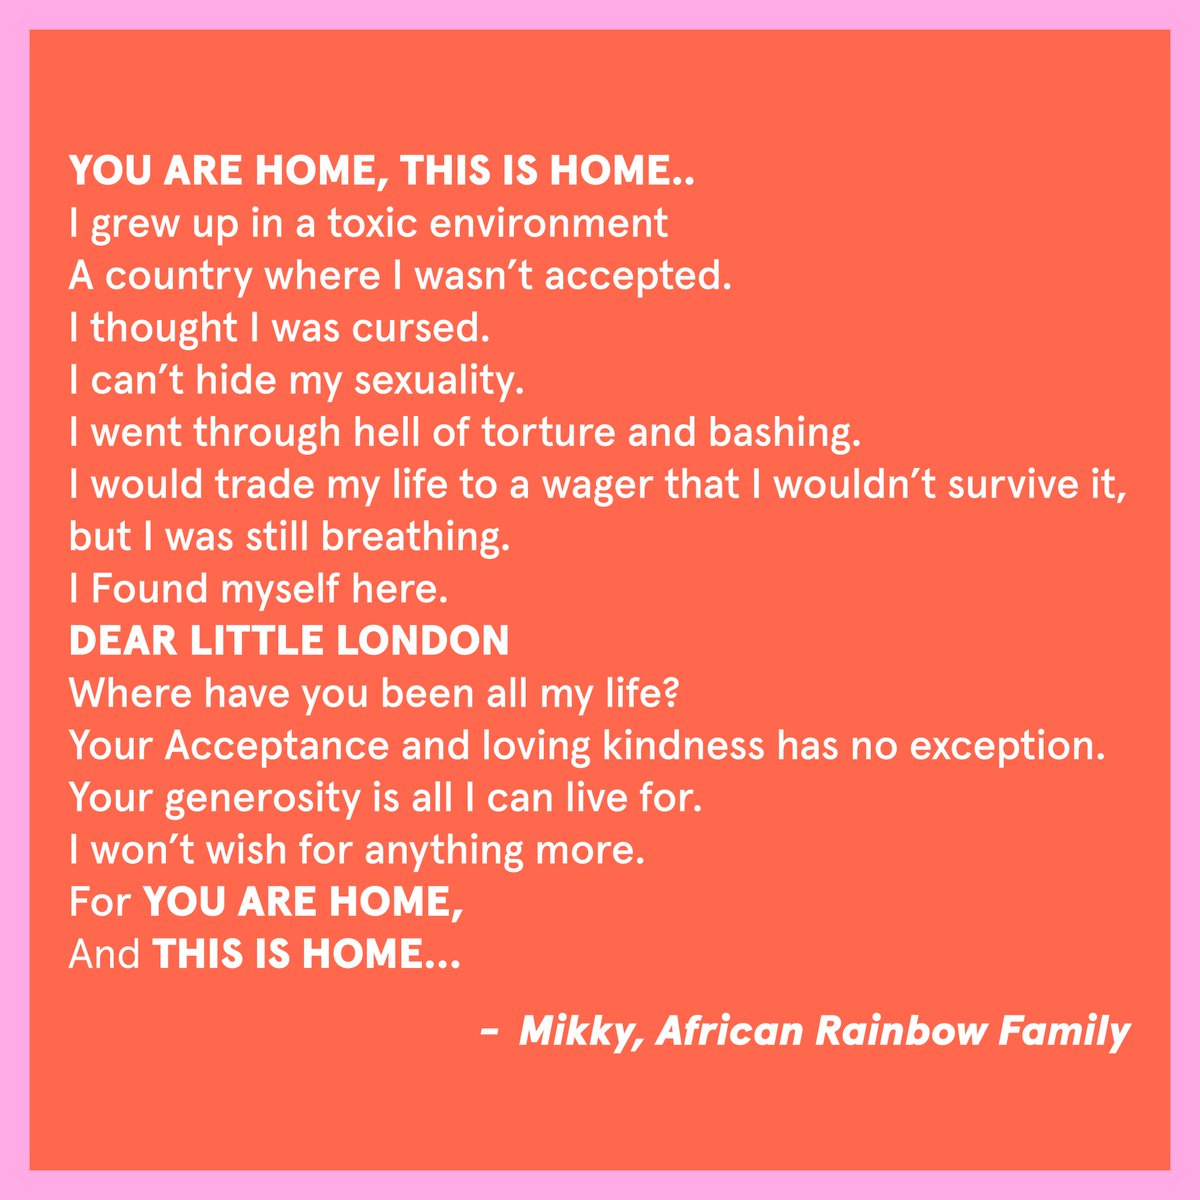 Storytelling helps us to build and strengthen communities, connecting us all. Inspired by our recent collaboration with @KINDSnacksUK, our partner, @AfricanRainbow1, shared this story of kindness with us; written by one of their service users after arriving to the UK.